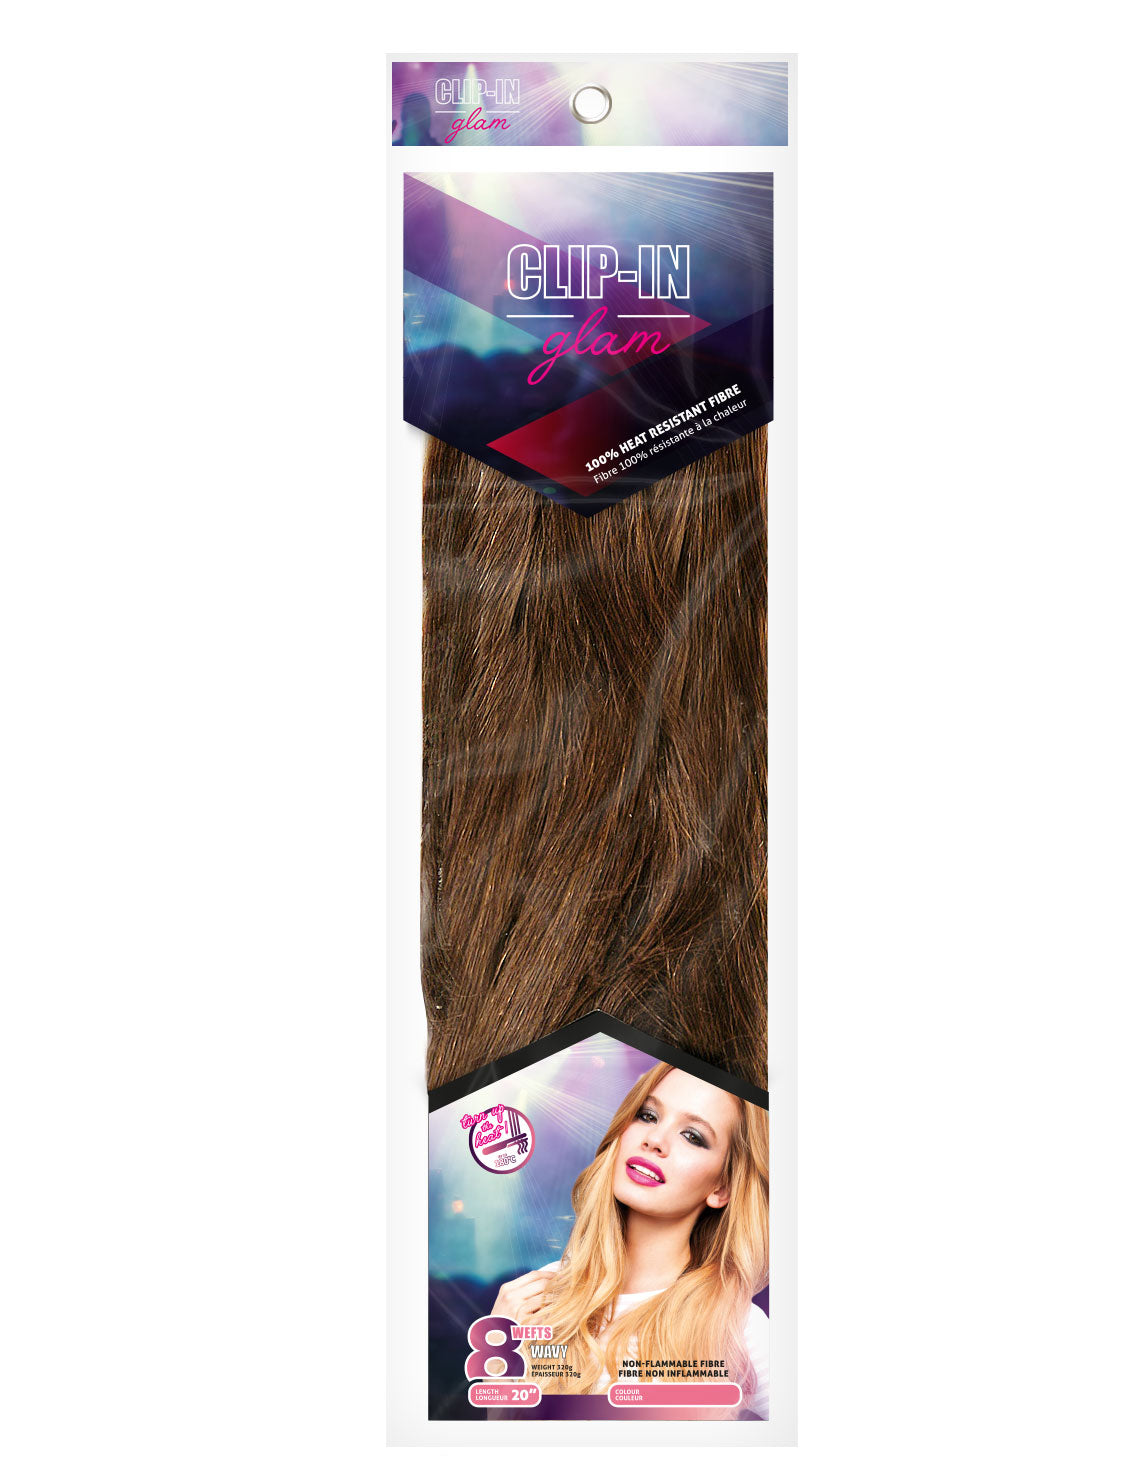 Clip-In Extension Glam Wavy 20"